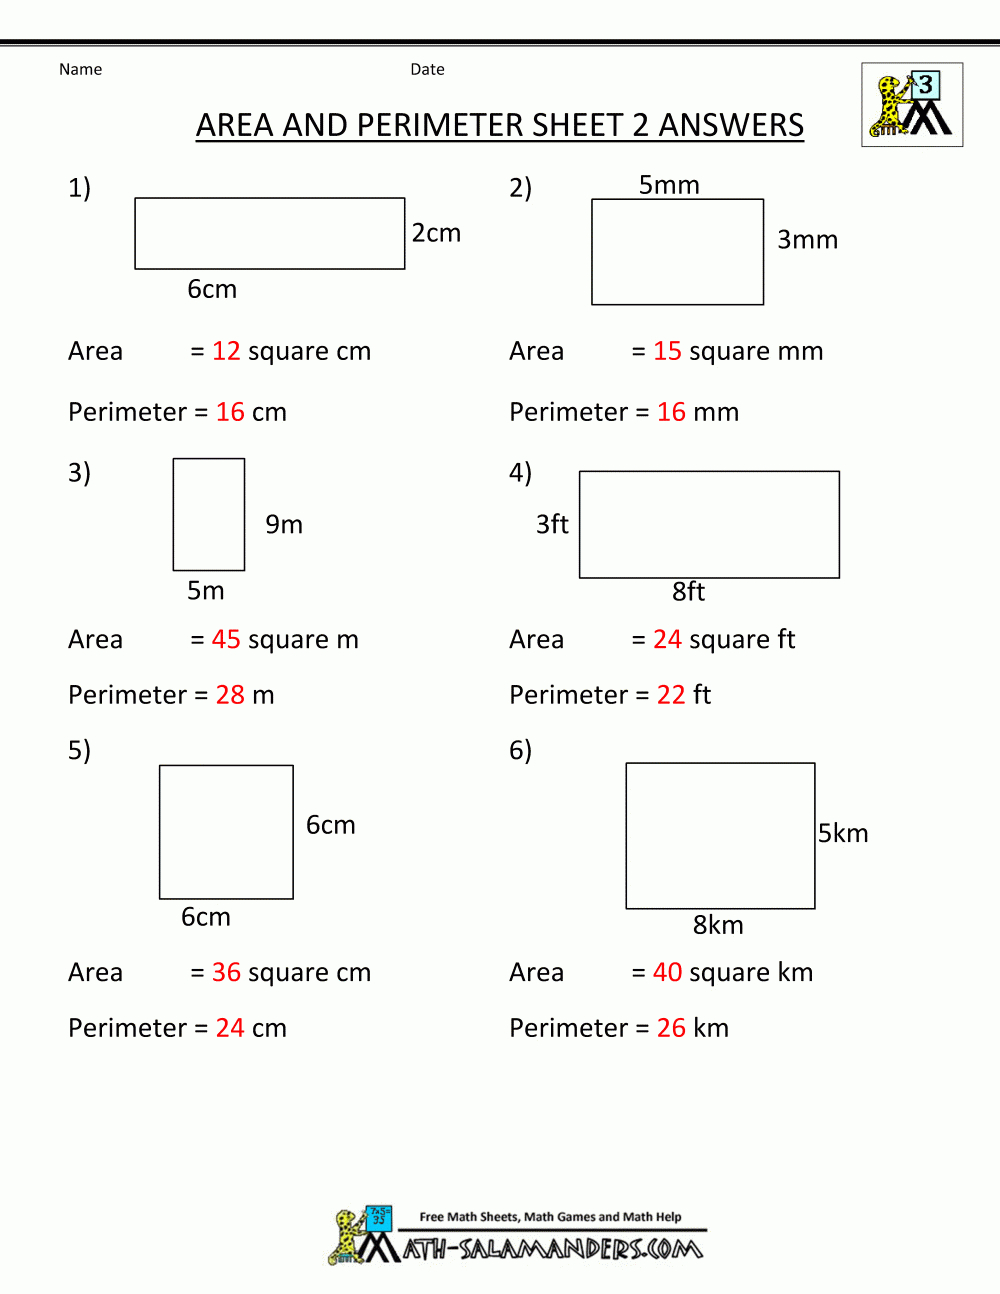 7th grade math worksheets free printable with answers free db excelcom